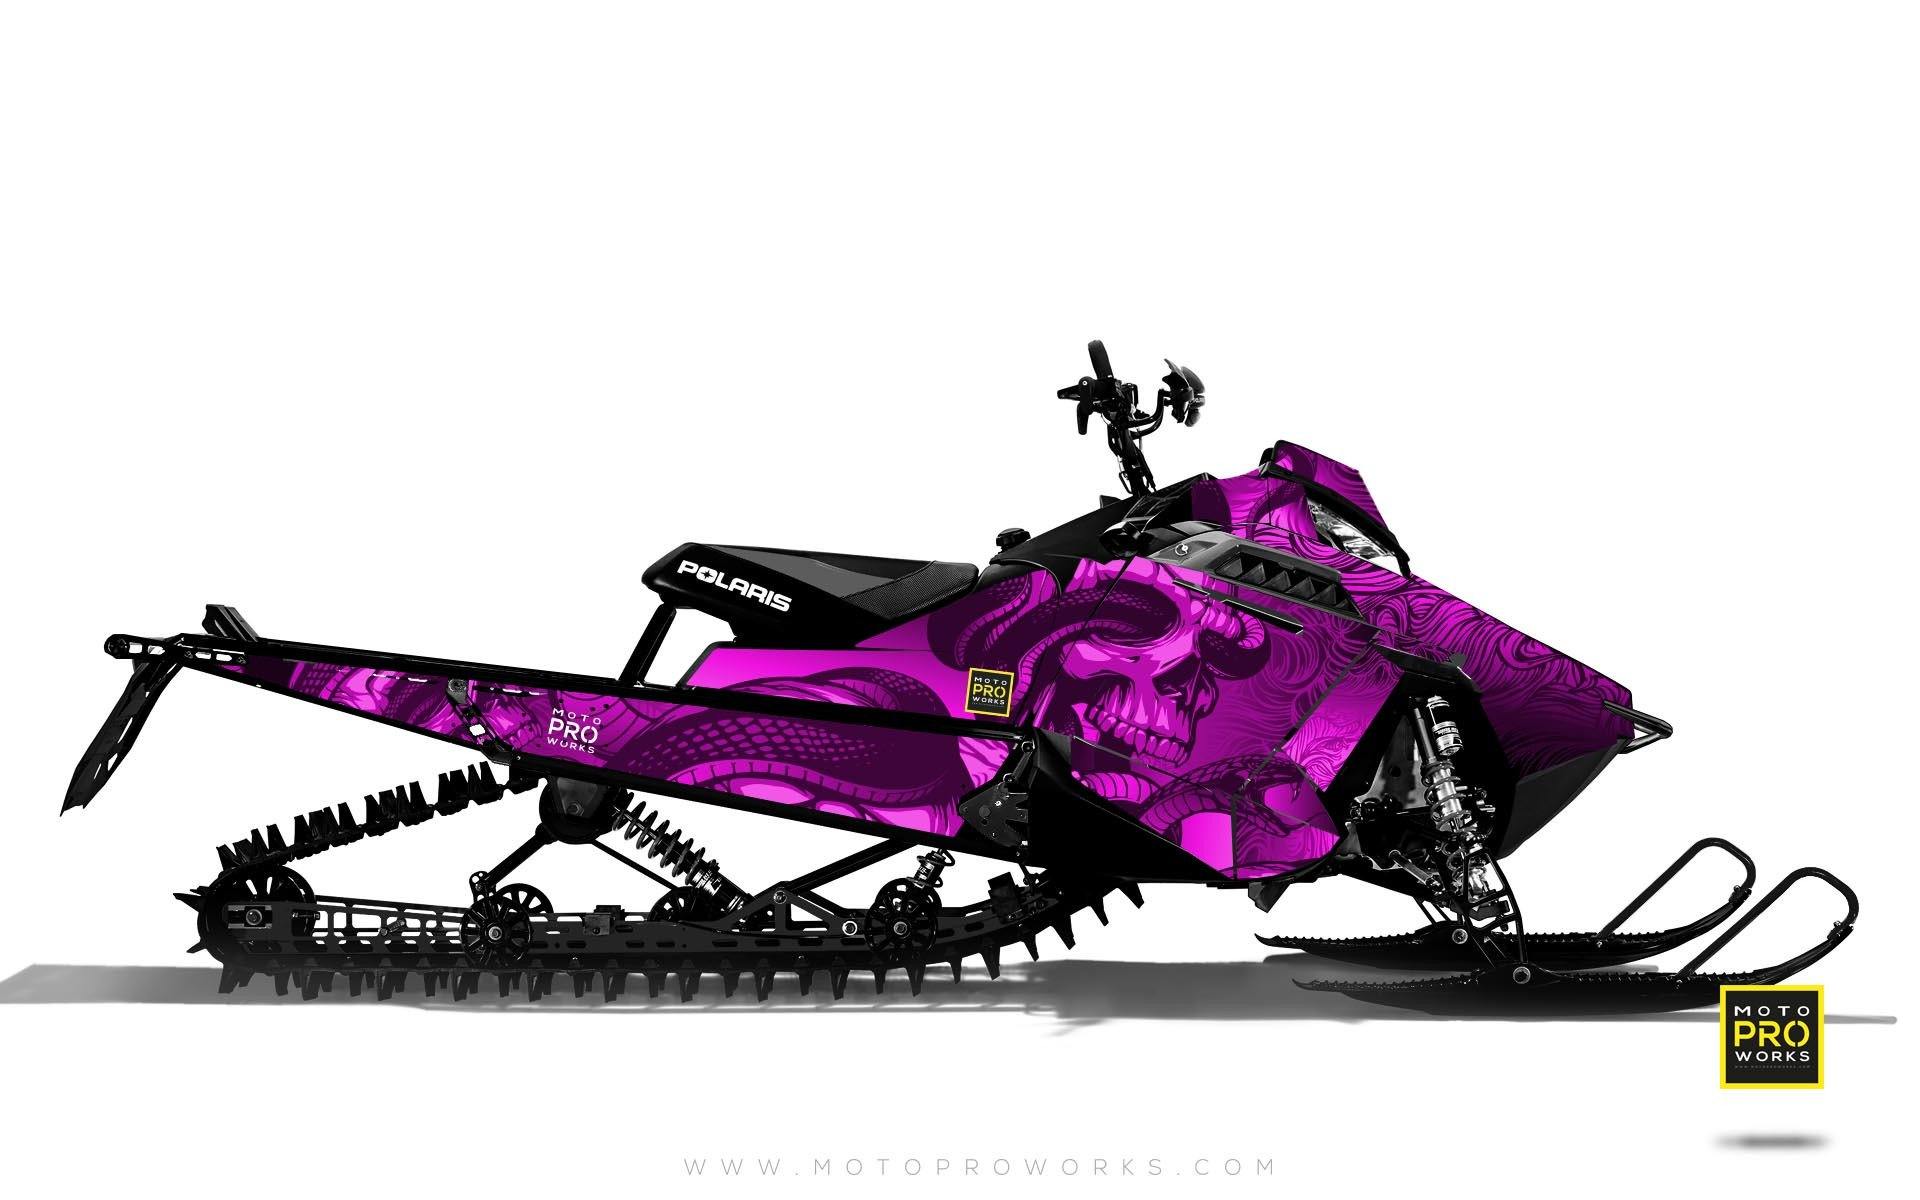 Polaris Graphics - "Ssskully" (pink) - MotoProWorks | Decals and Bike Graphic kit